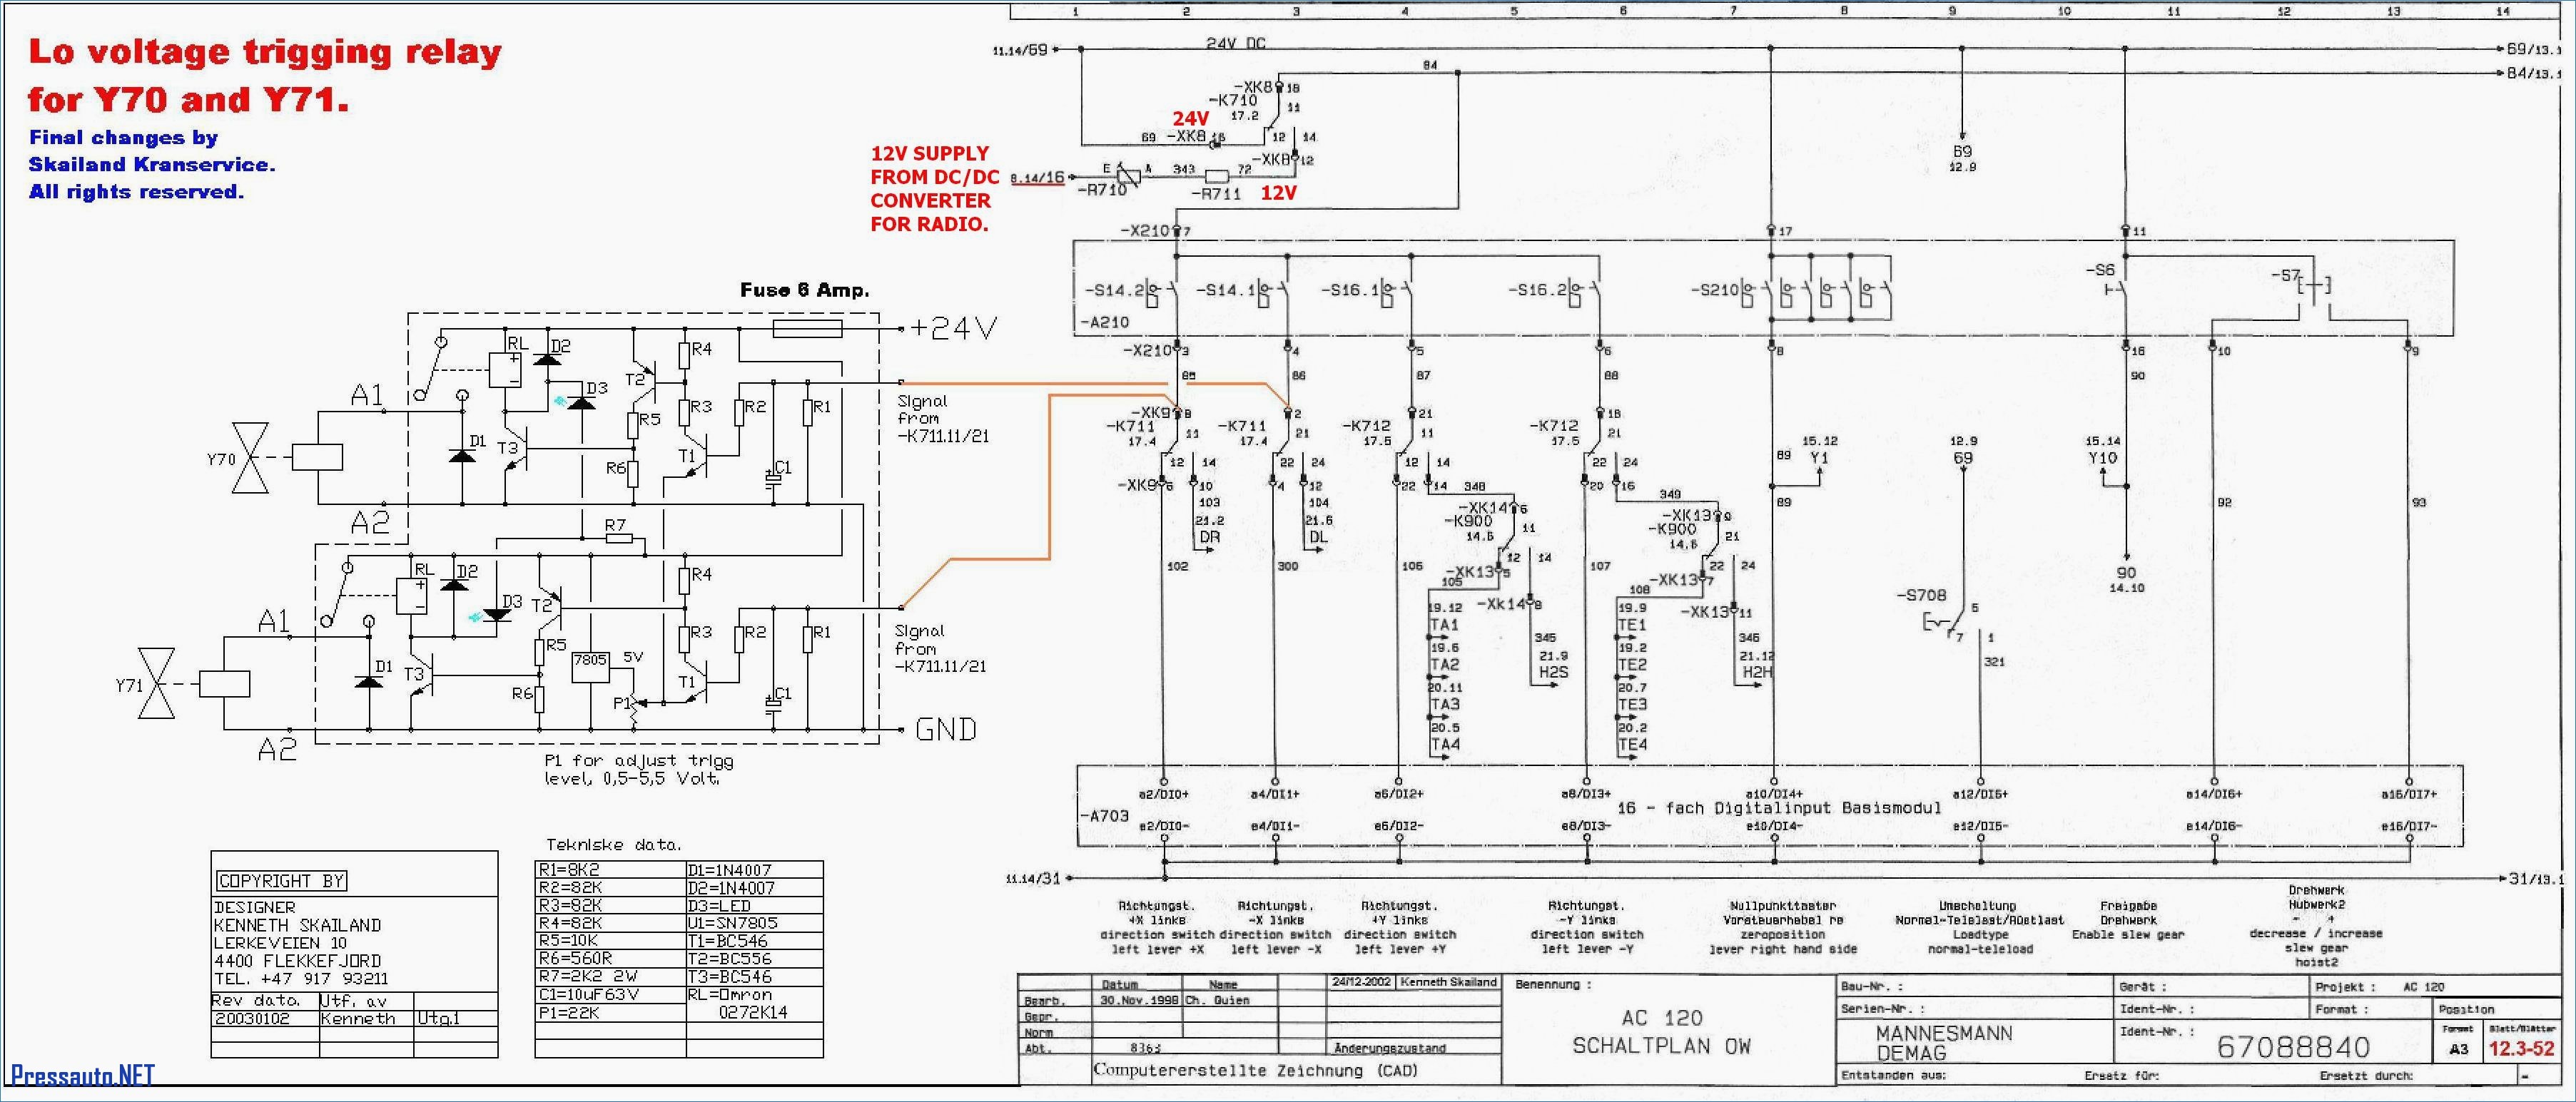 Abb Ach550 Wiring Diagram Abb Vfd Wiring Diagram Demag Crane Free Image About with Overhead